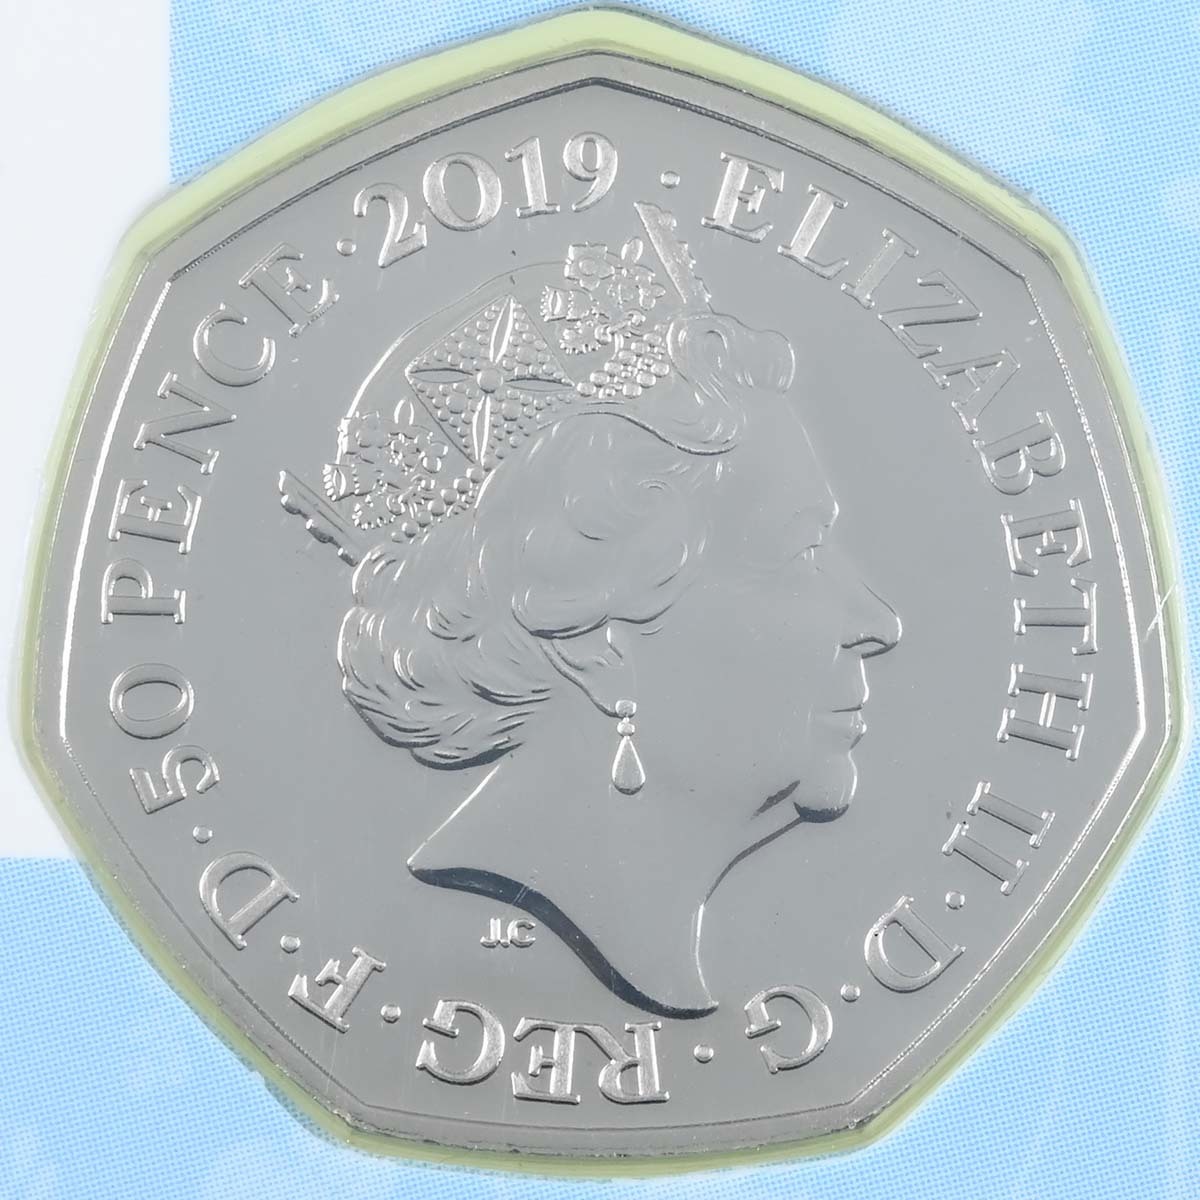 UK19PRBU 2019 Beatrix Potter Peter Rabbit Fifty Pence Brilliant Uncirculated Coin In Folder Obverse